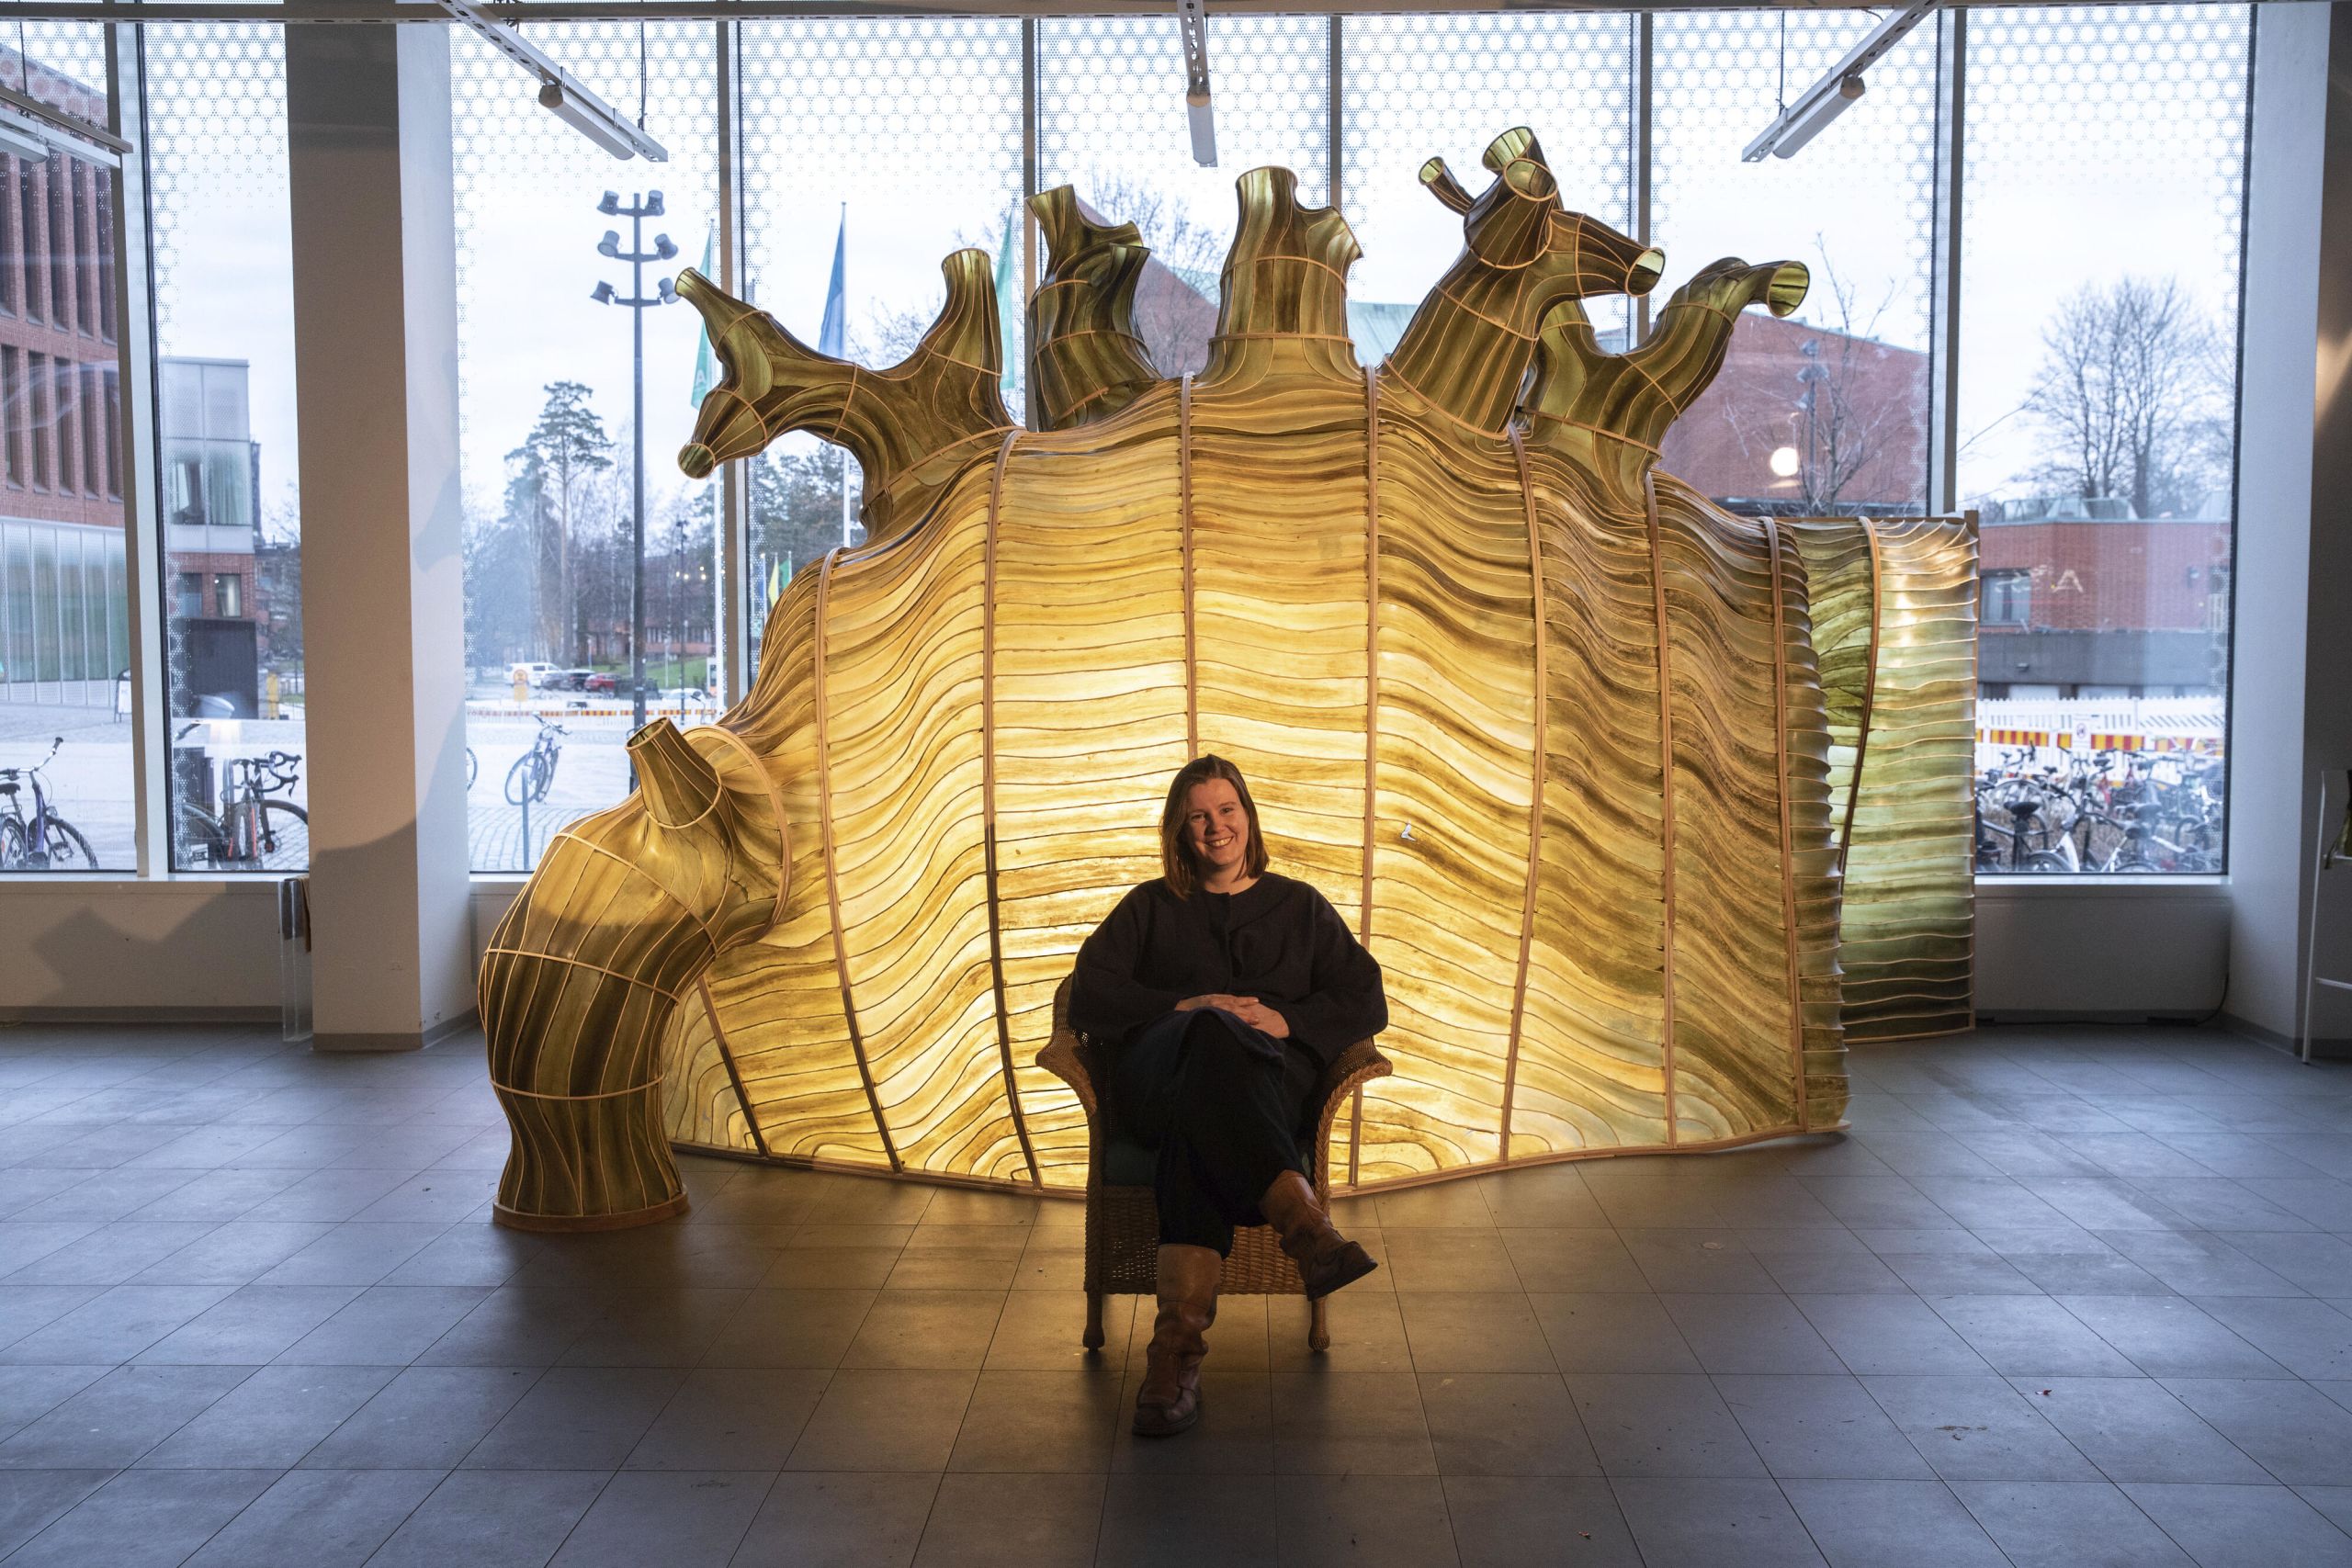 A seaweed pavilion lit up with researcher in the middle of the picture